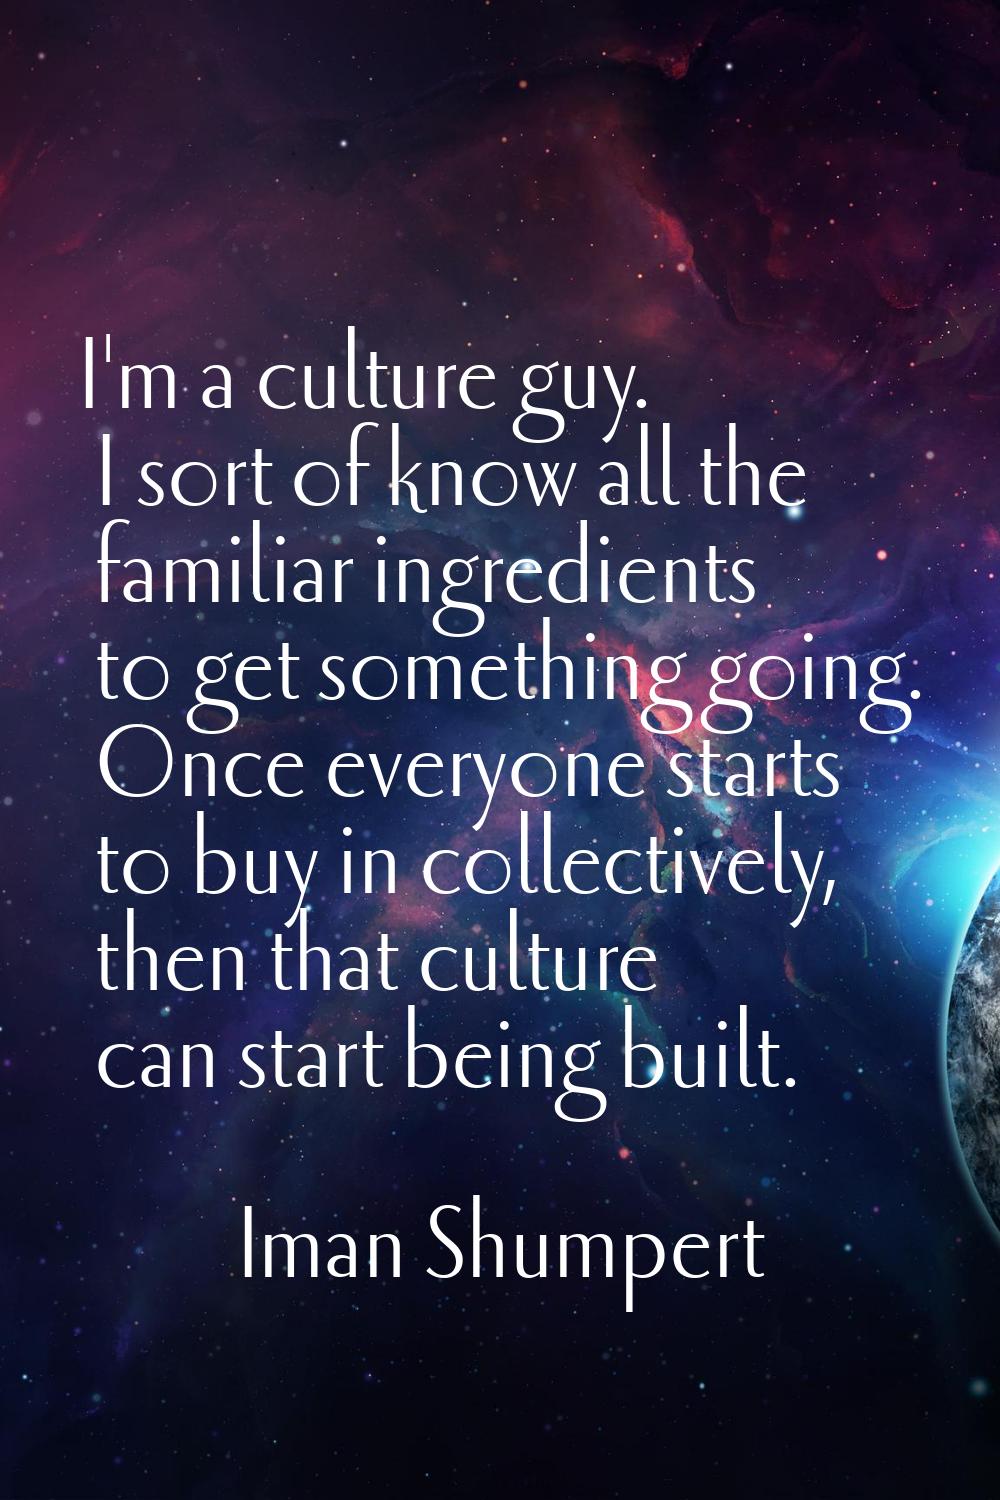 I'm a culture guy. I sort of know all the familiar ingredients to get something going. Once everyon